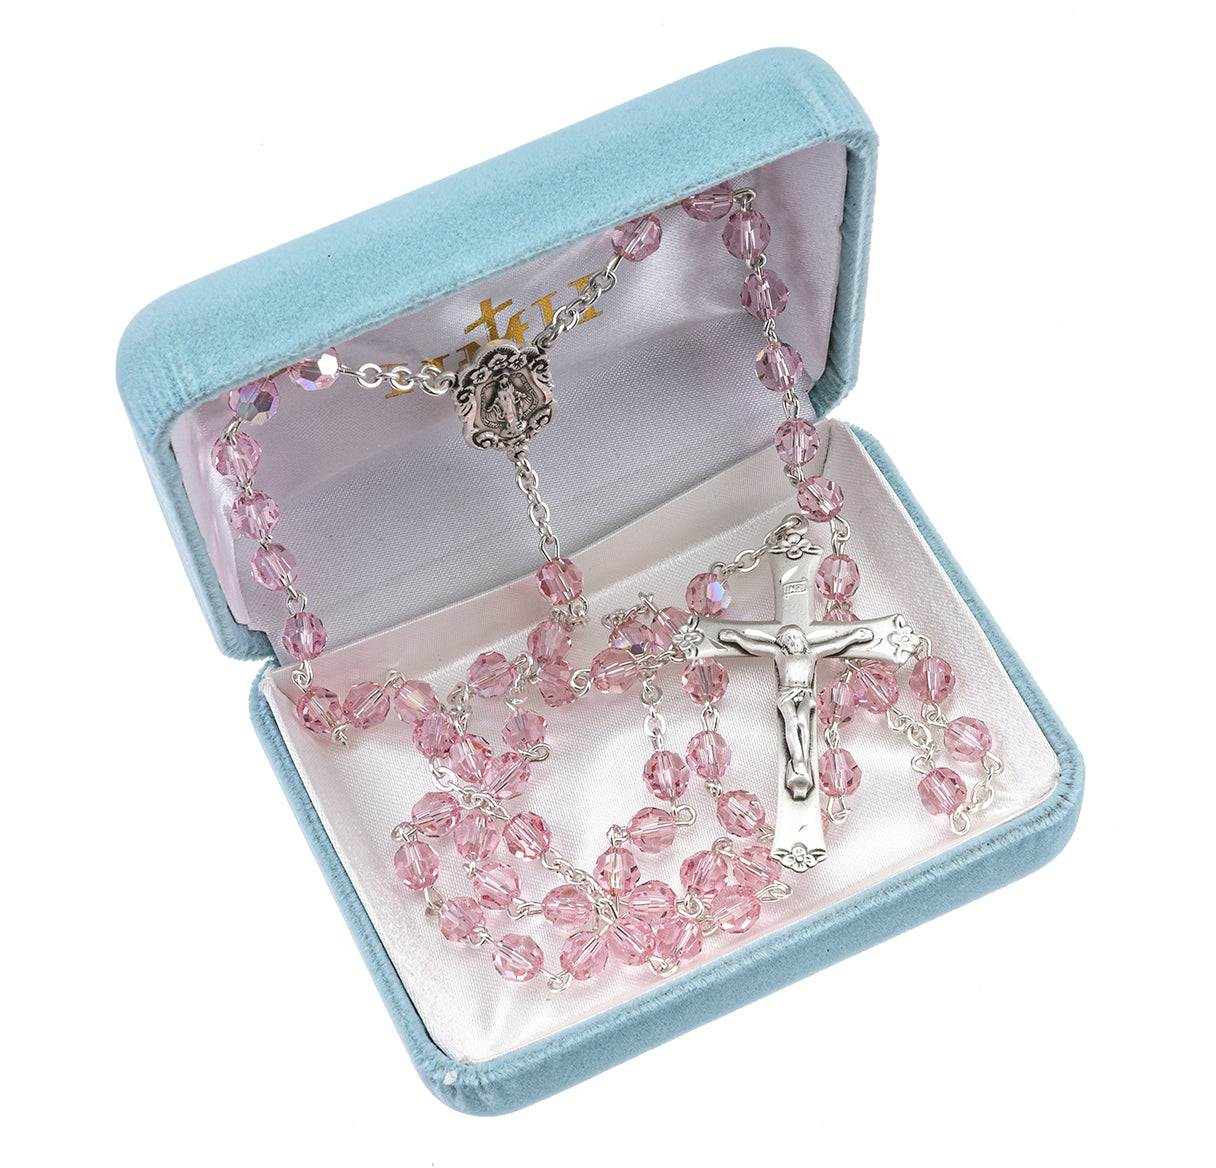 Rosary Sterling Crucifix and Centerpiece Created with Swarovski Crystal 6mm Faceted Round Light Rose Beads by HMH